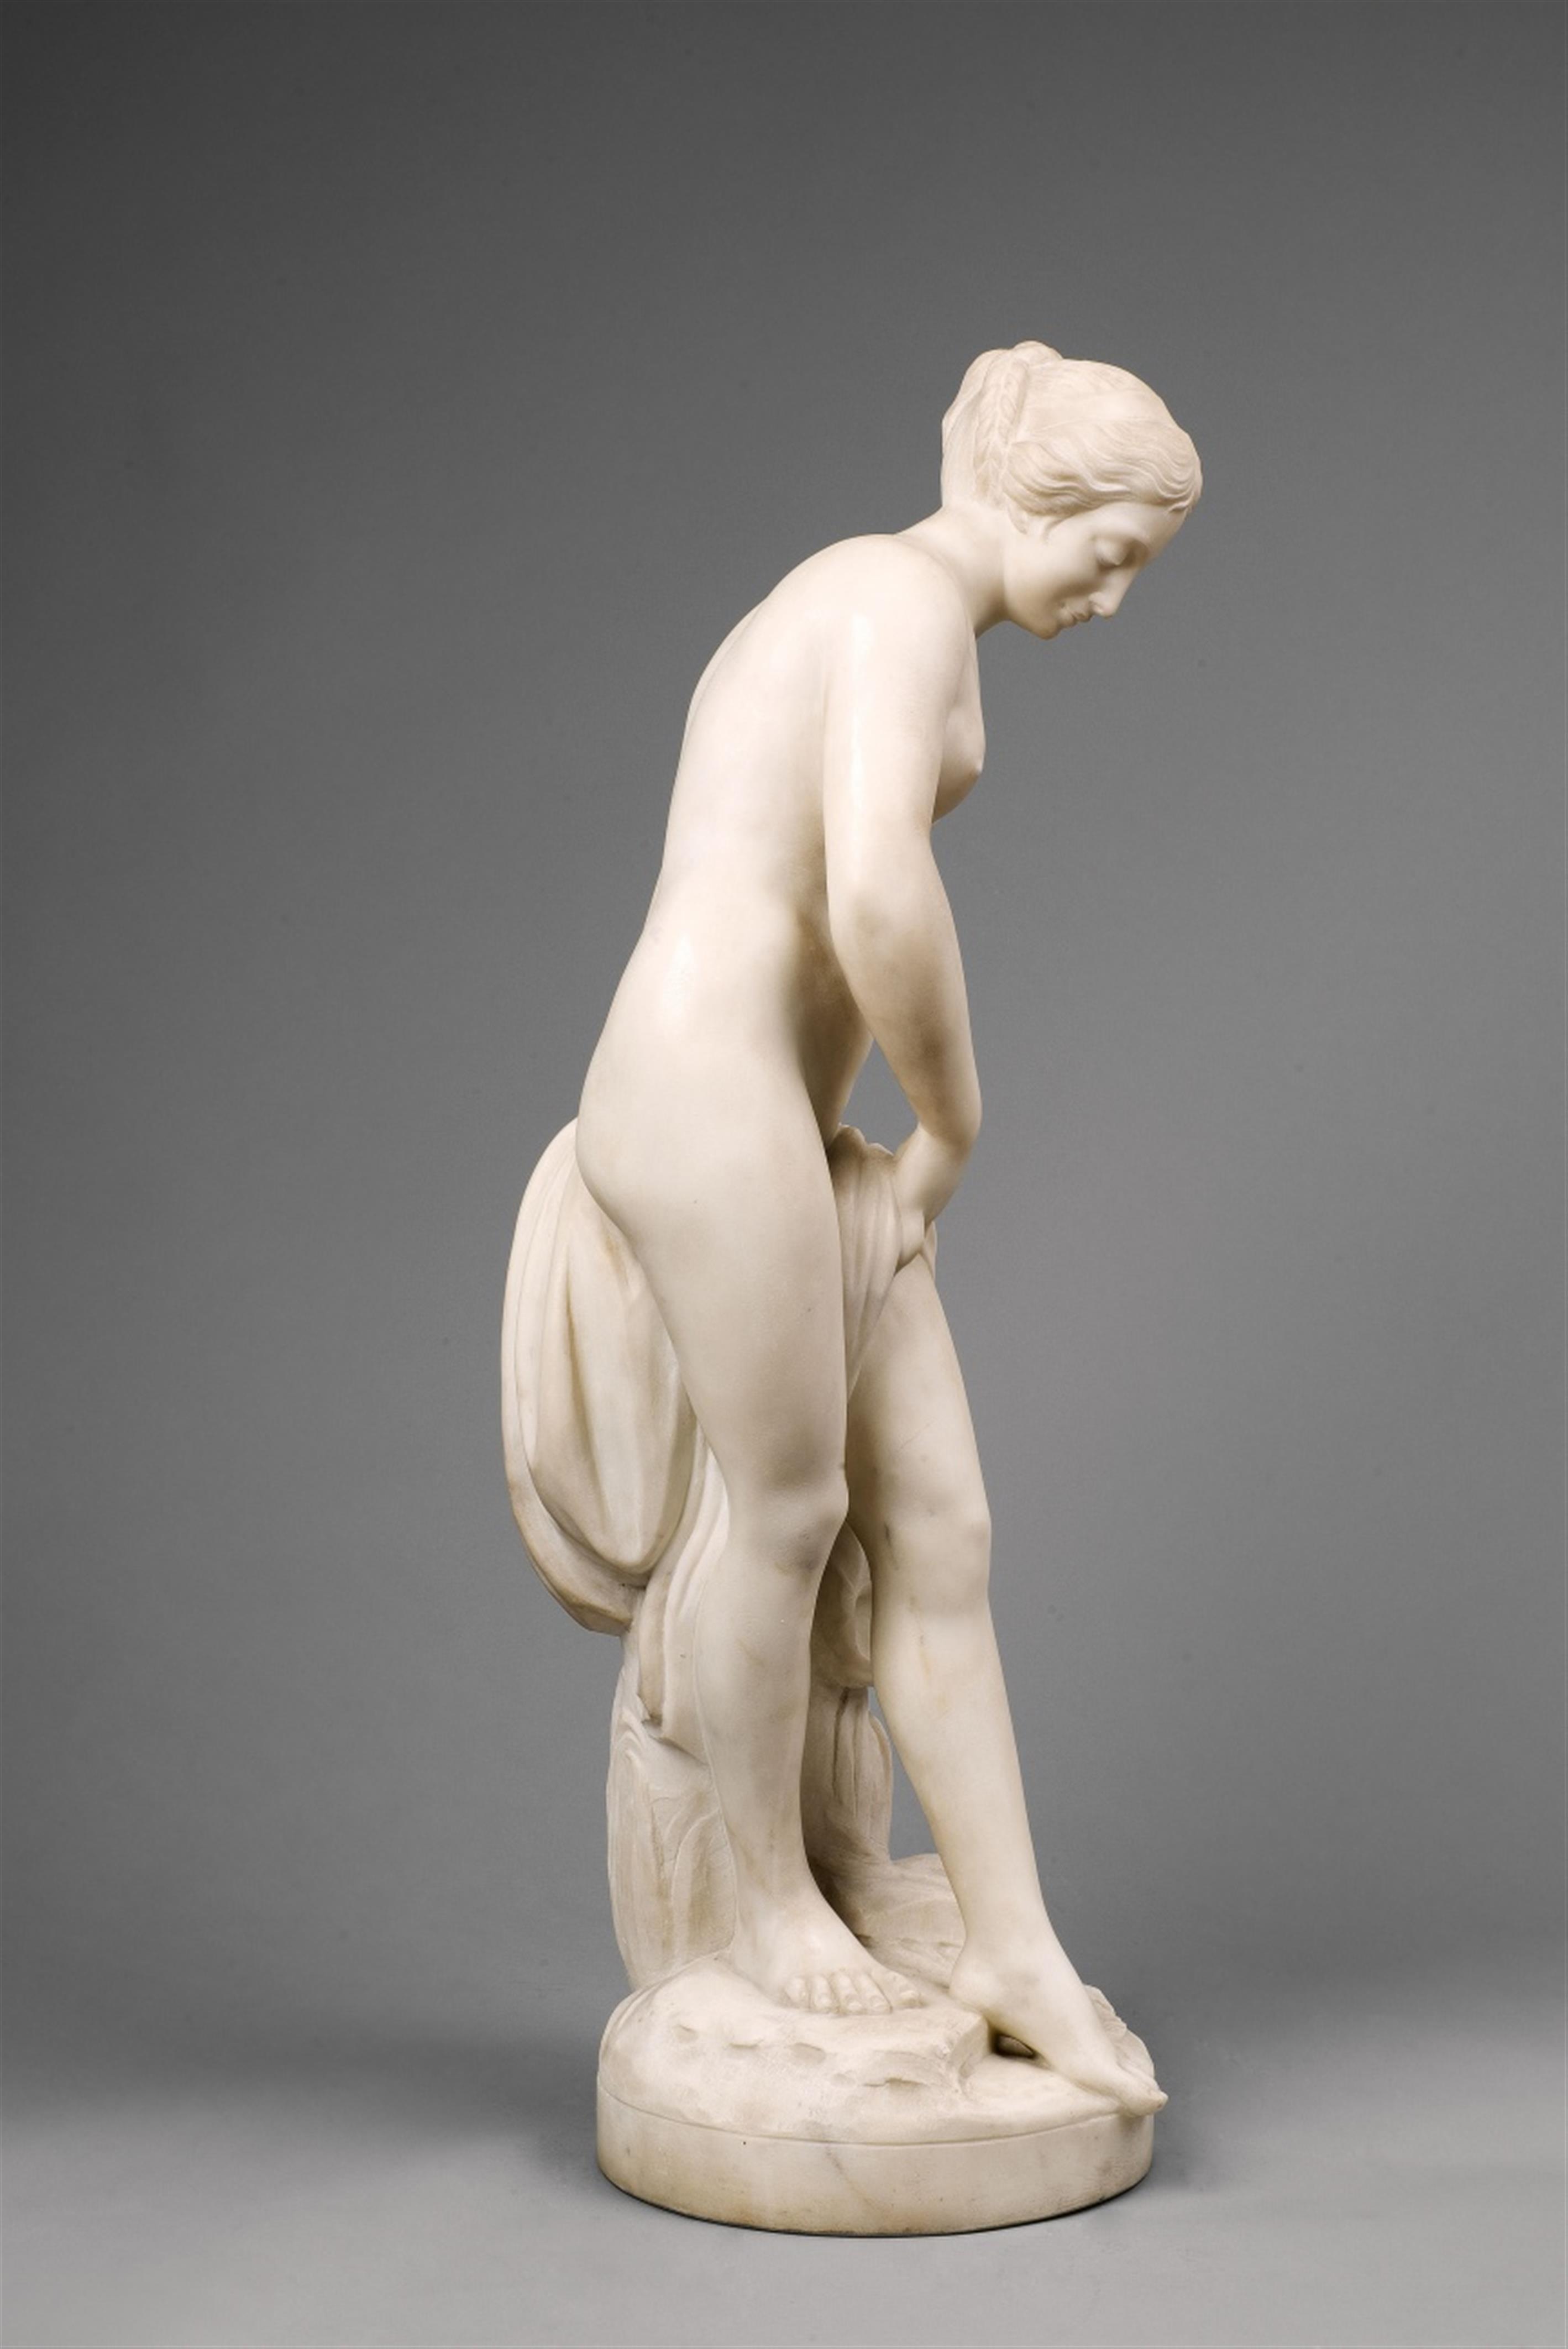 Baigneuse nach Etienne-Maurice Falconet - image-5